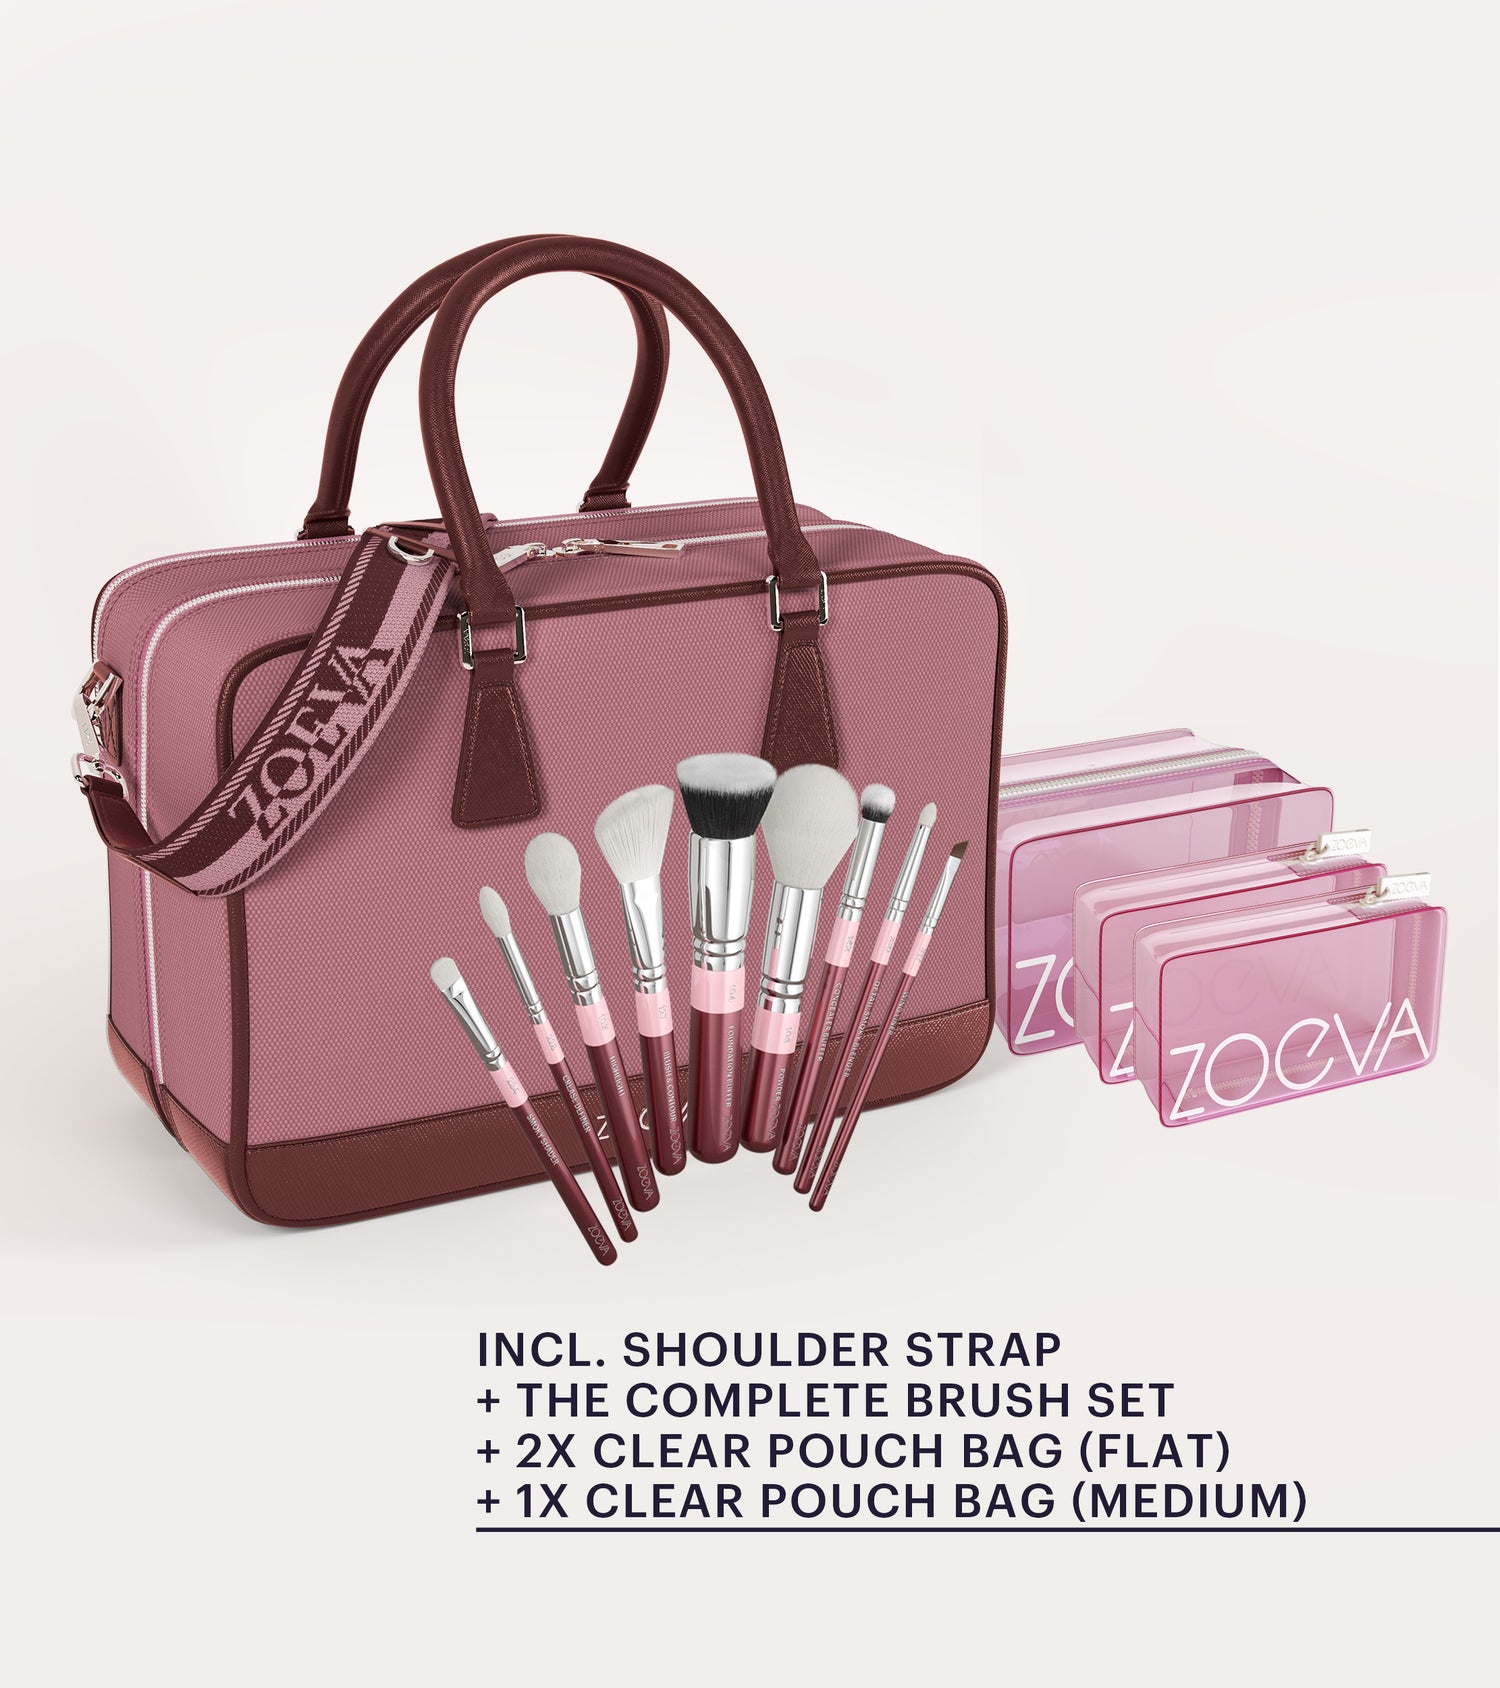 ZOEVA - The Zoe Bag & The Complete Pinselset (Dusty Bordeaux) - BRUSH SET